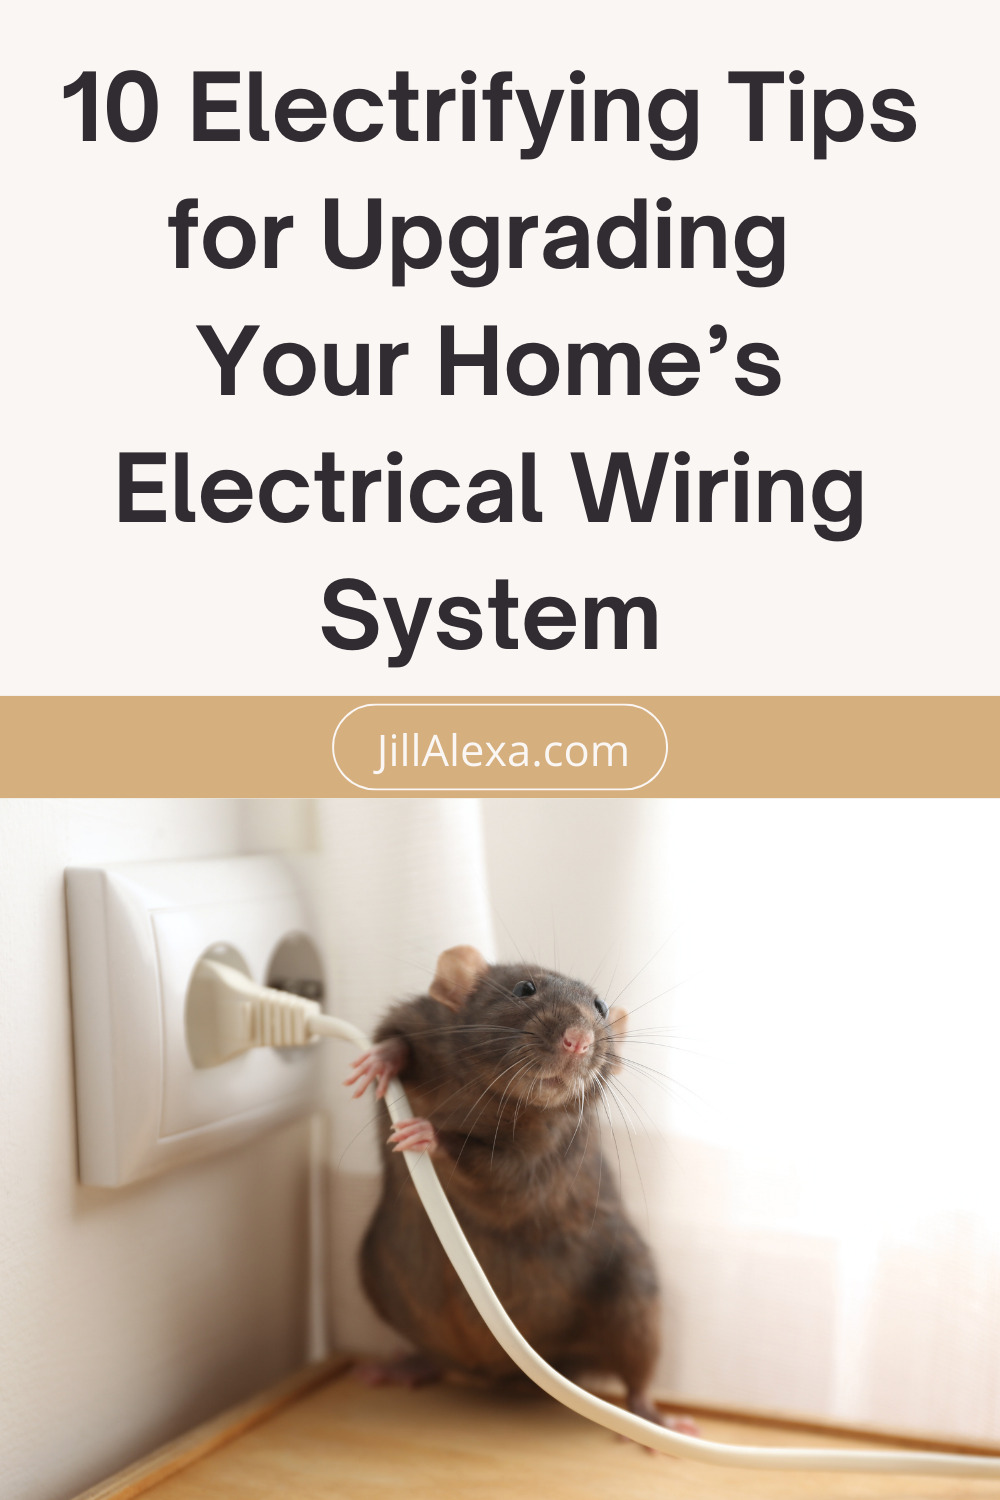 10 Electrifying Tips for Upgrading Your Home’s Electrical Wiring System for the Long Haul | Electrifying Tips Electrical Wiring pin